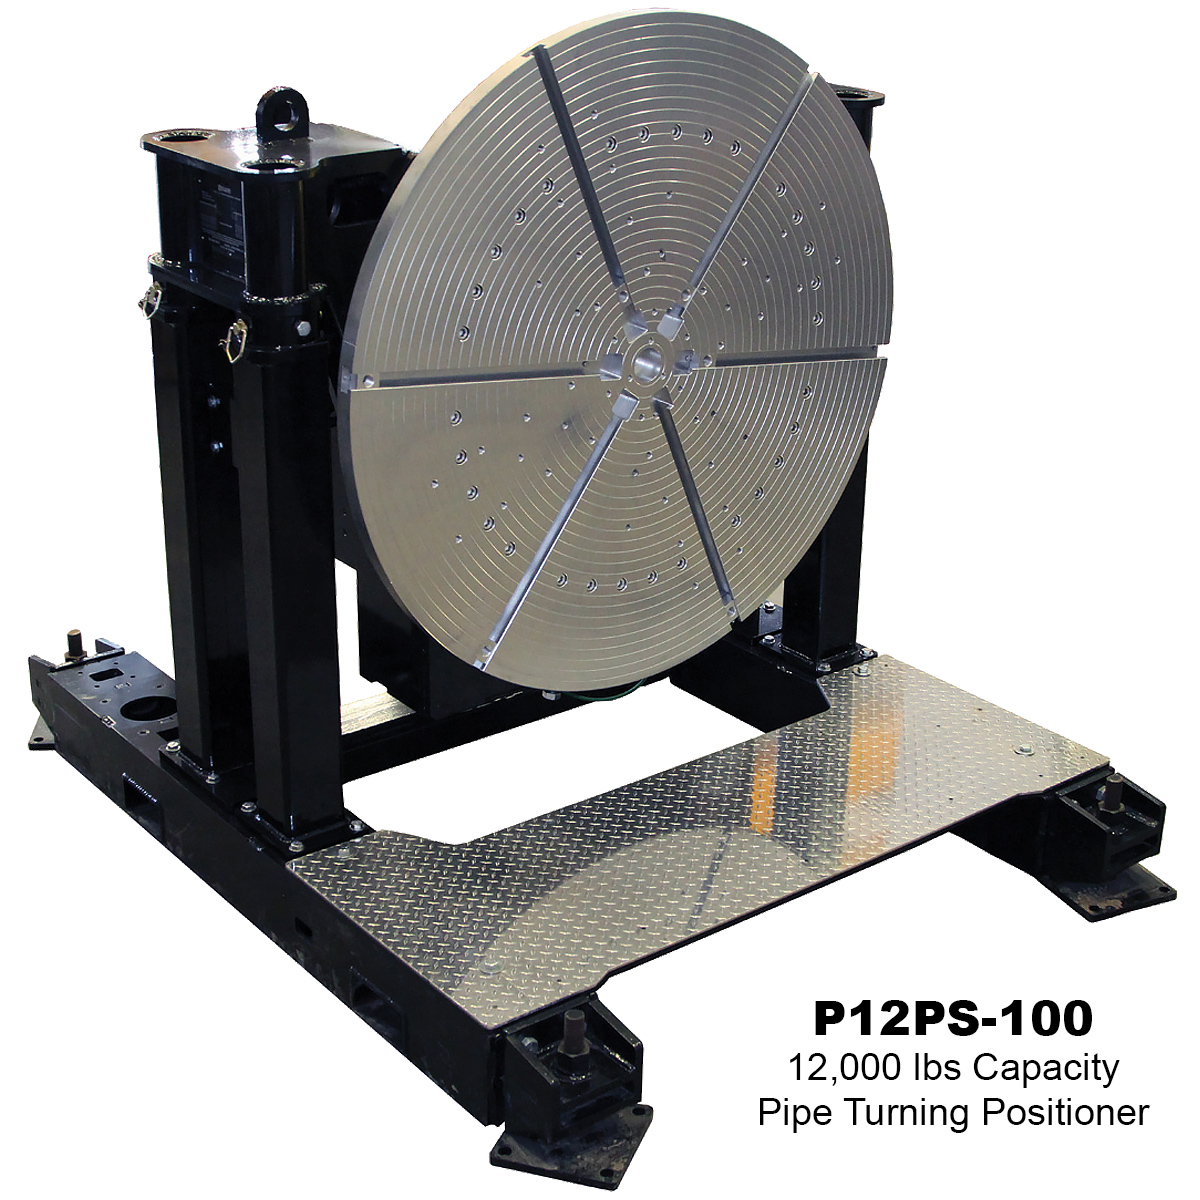 01-12000-lb-Pipe-Turning-Positioner